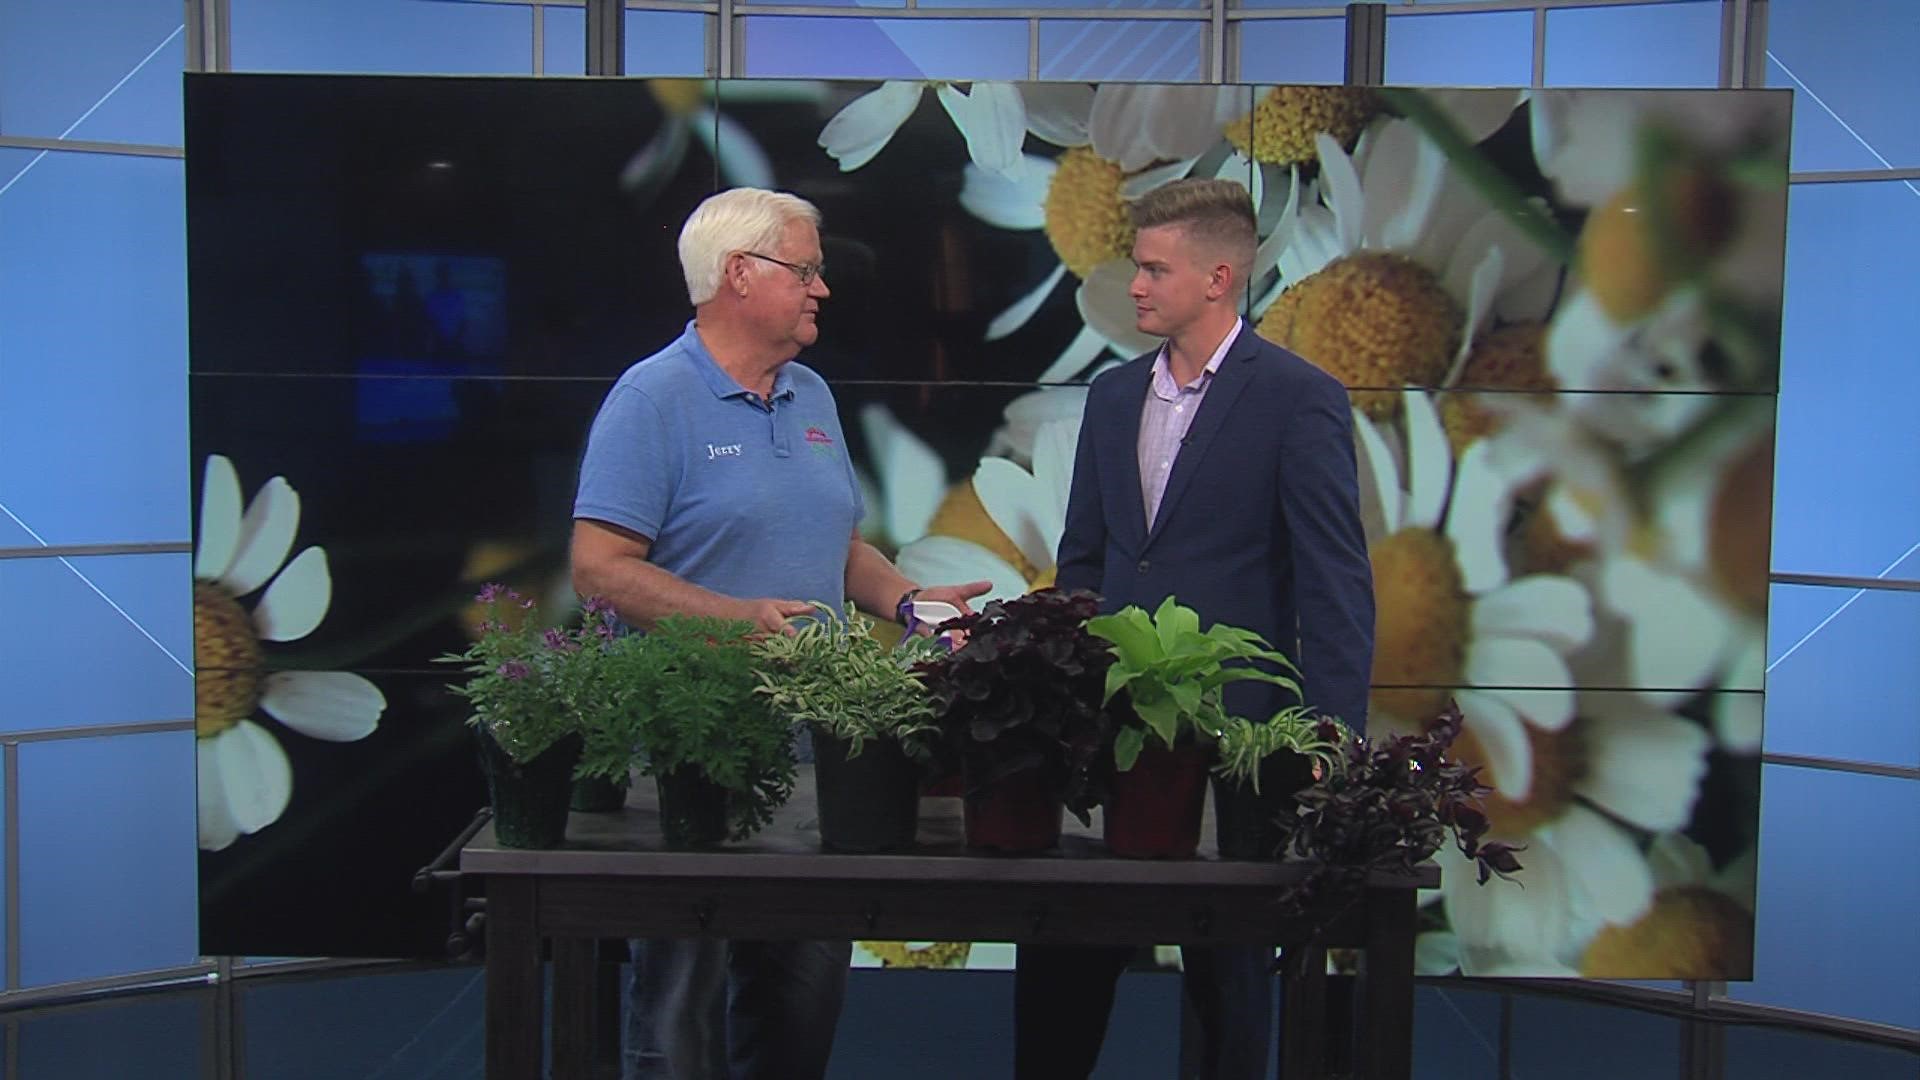 Jerry Holub from Holub Greenhouses gives advice about proper plant care in intense summer heat.